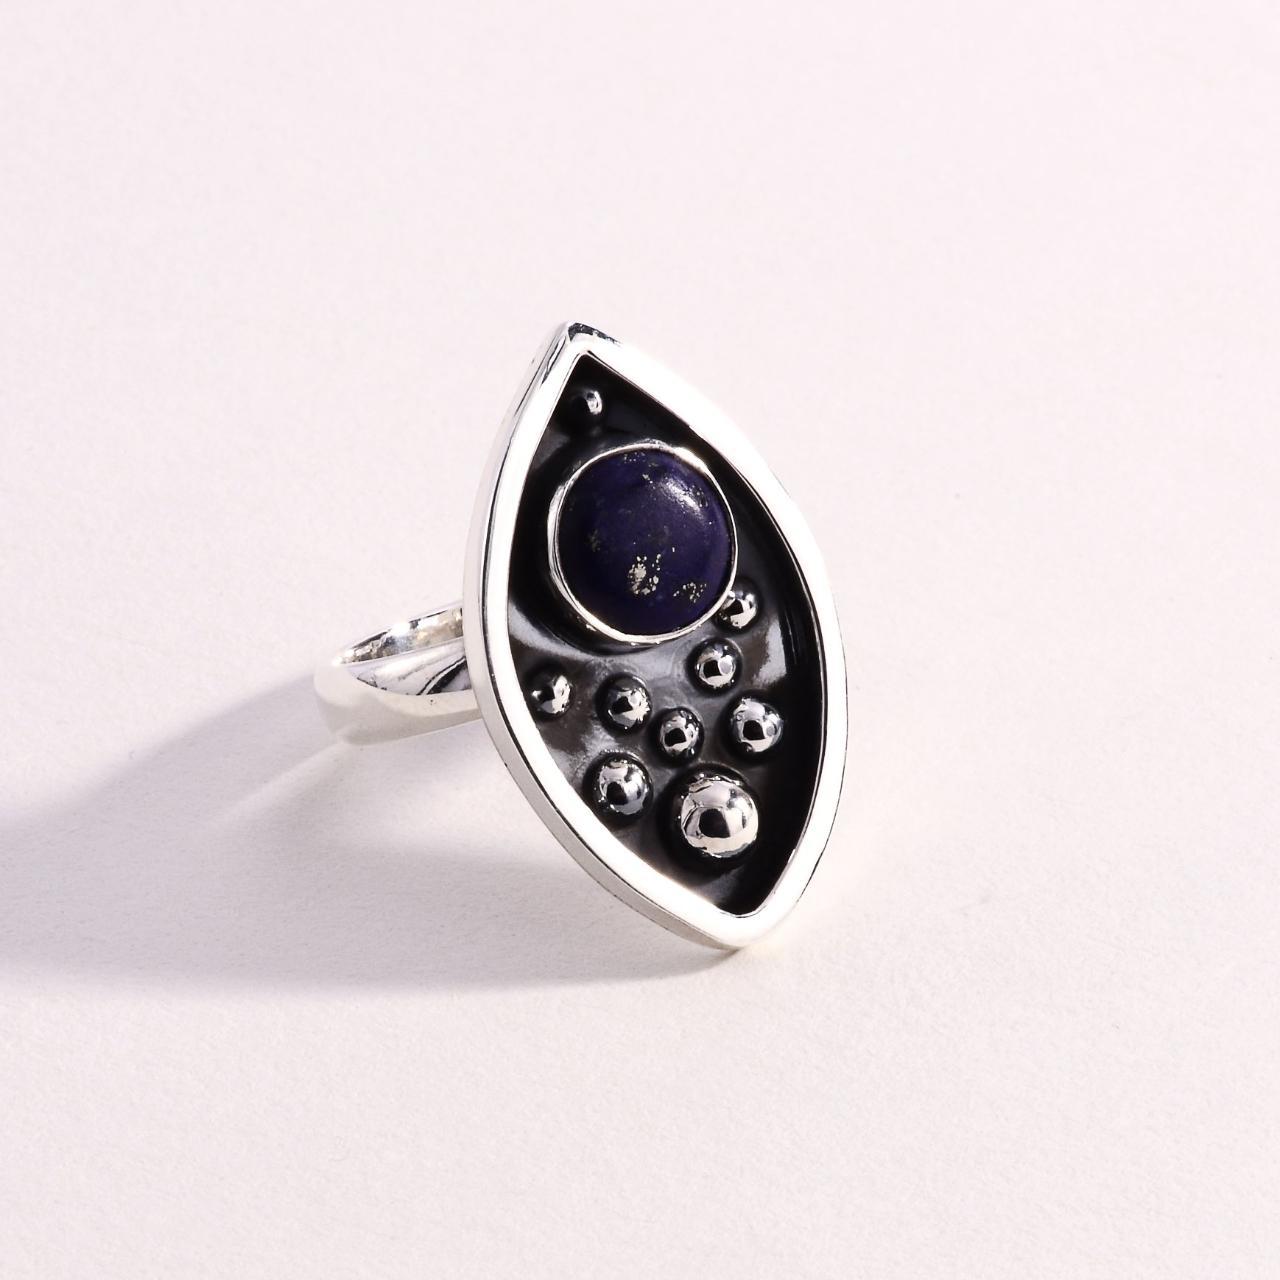 Product Image 2 - Sterling 925 Lapis Ring

Sterling Silver

Size